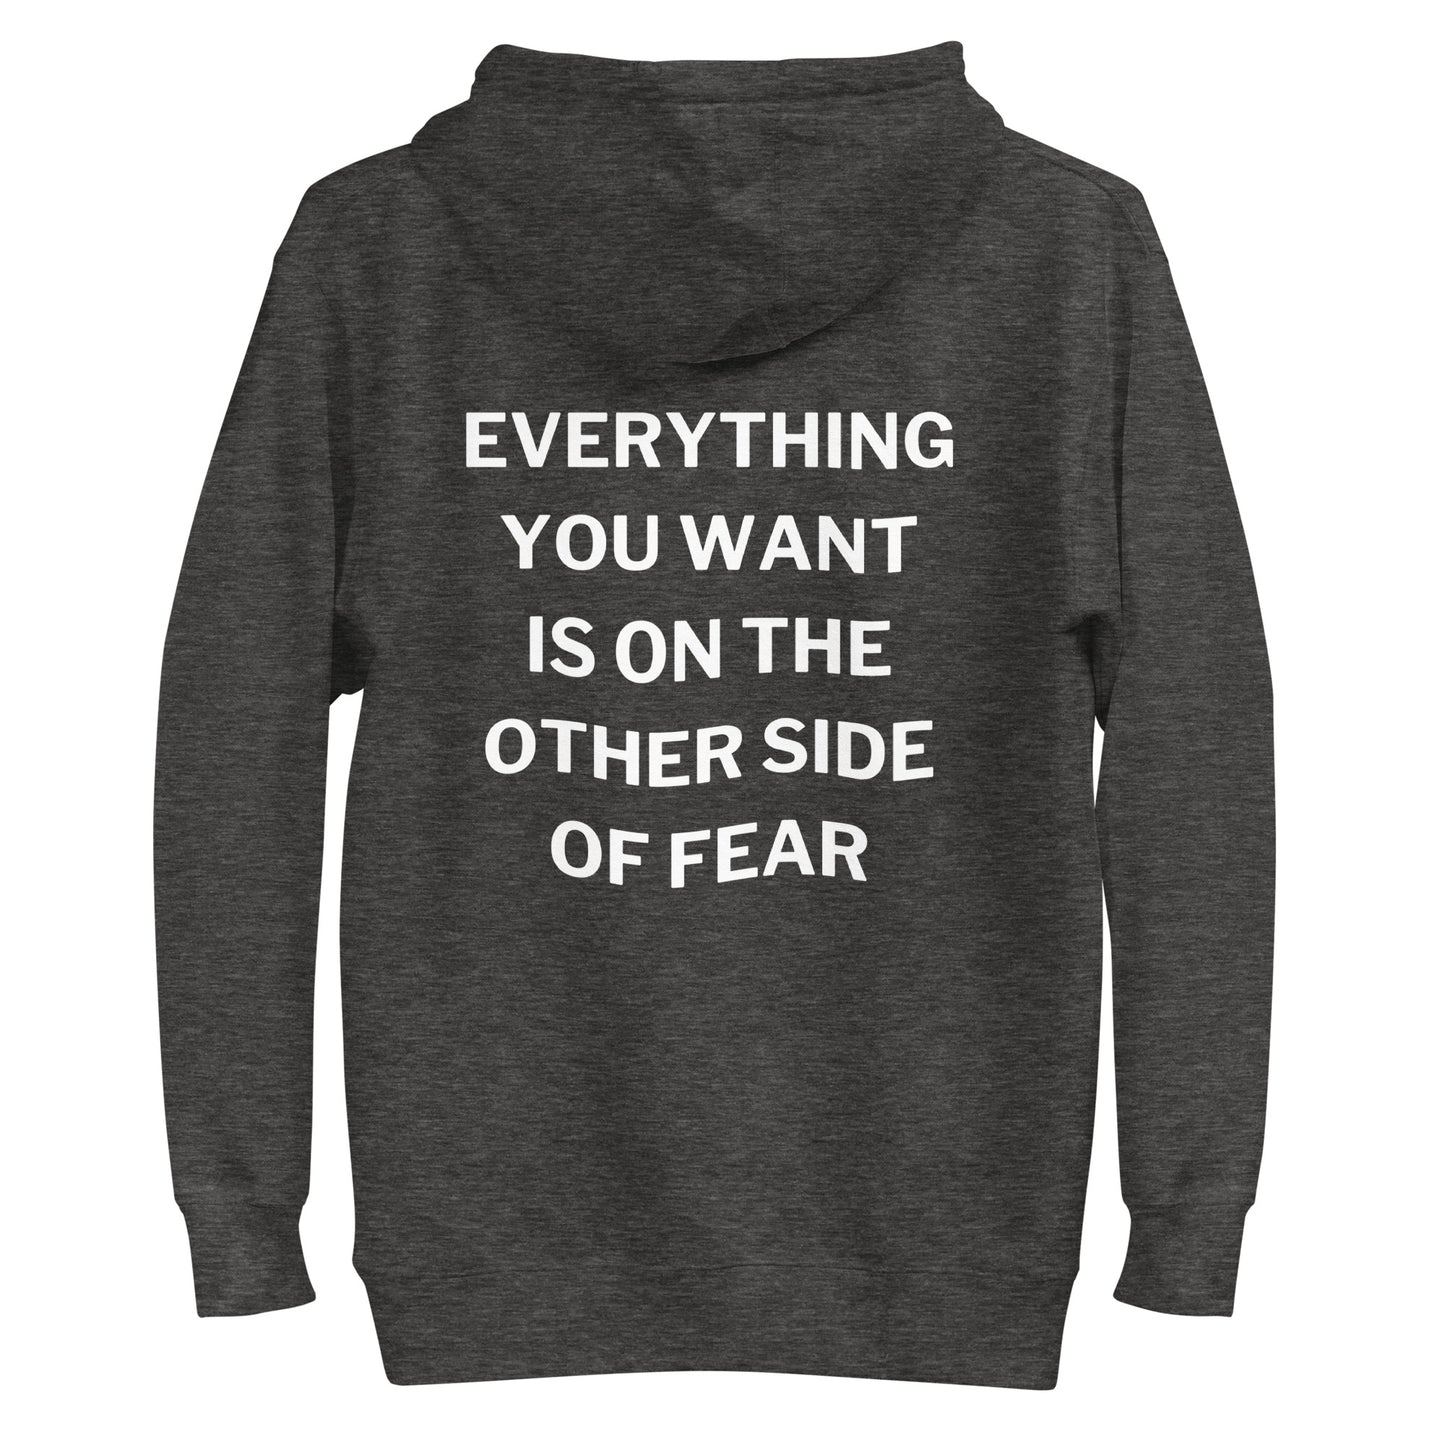 Everything You Want - Embroidered Unisex Hoodie -Multi Colors Available